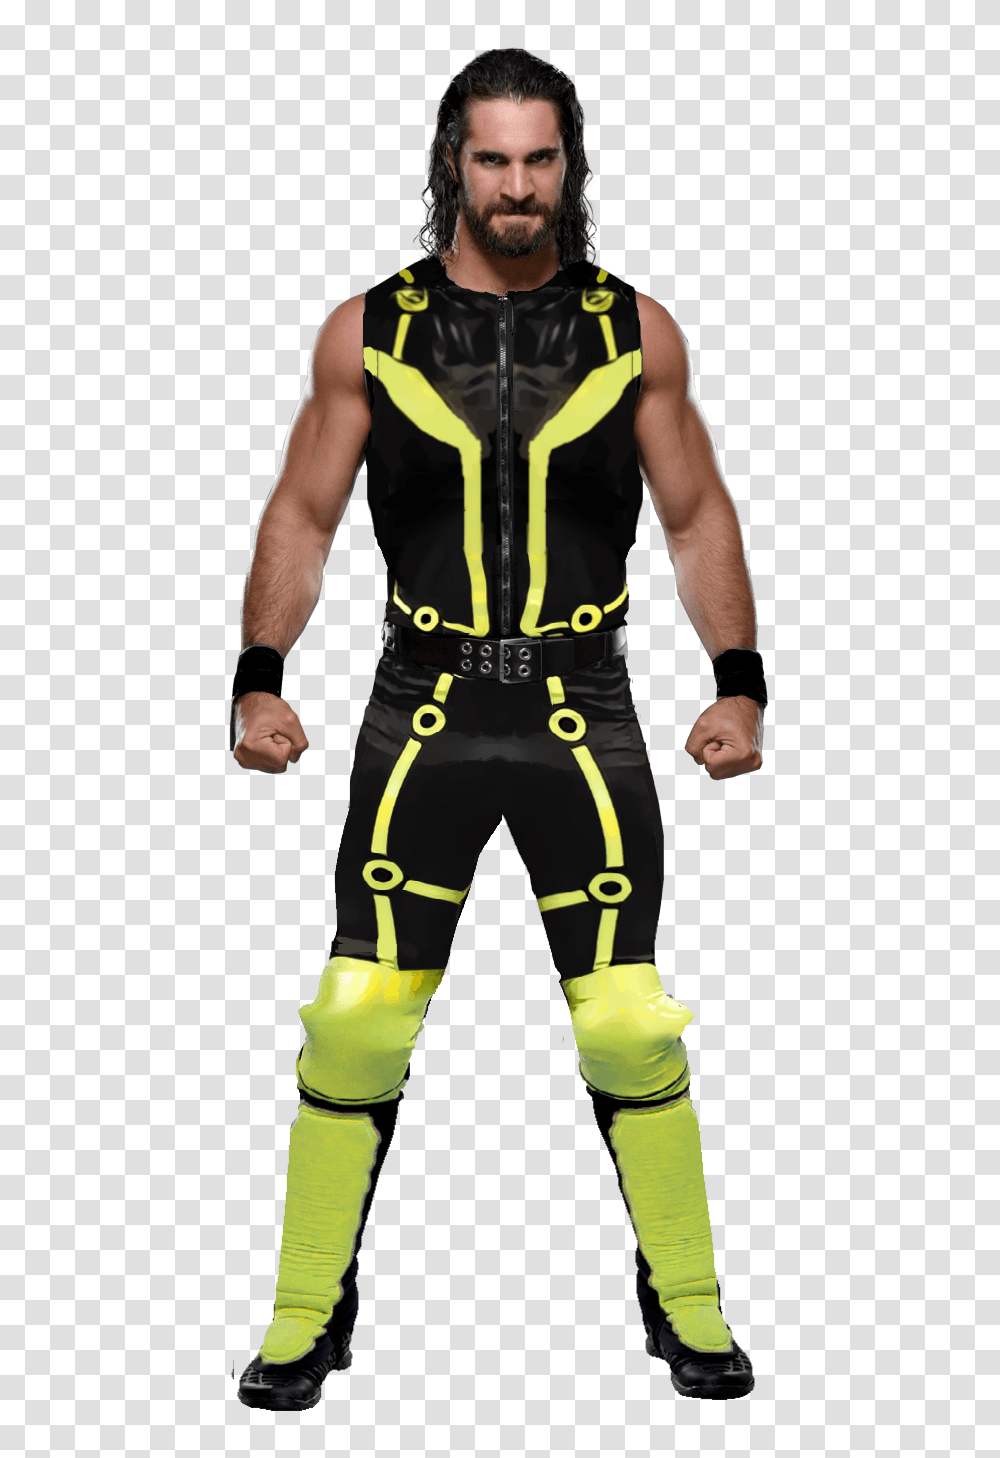 Post Some Pictures Of Rarelittle Used Gear In The Comments Ill, Person, Costume, Sport, Arm Transparent Png